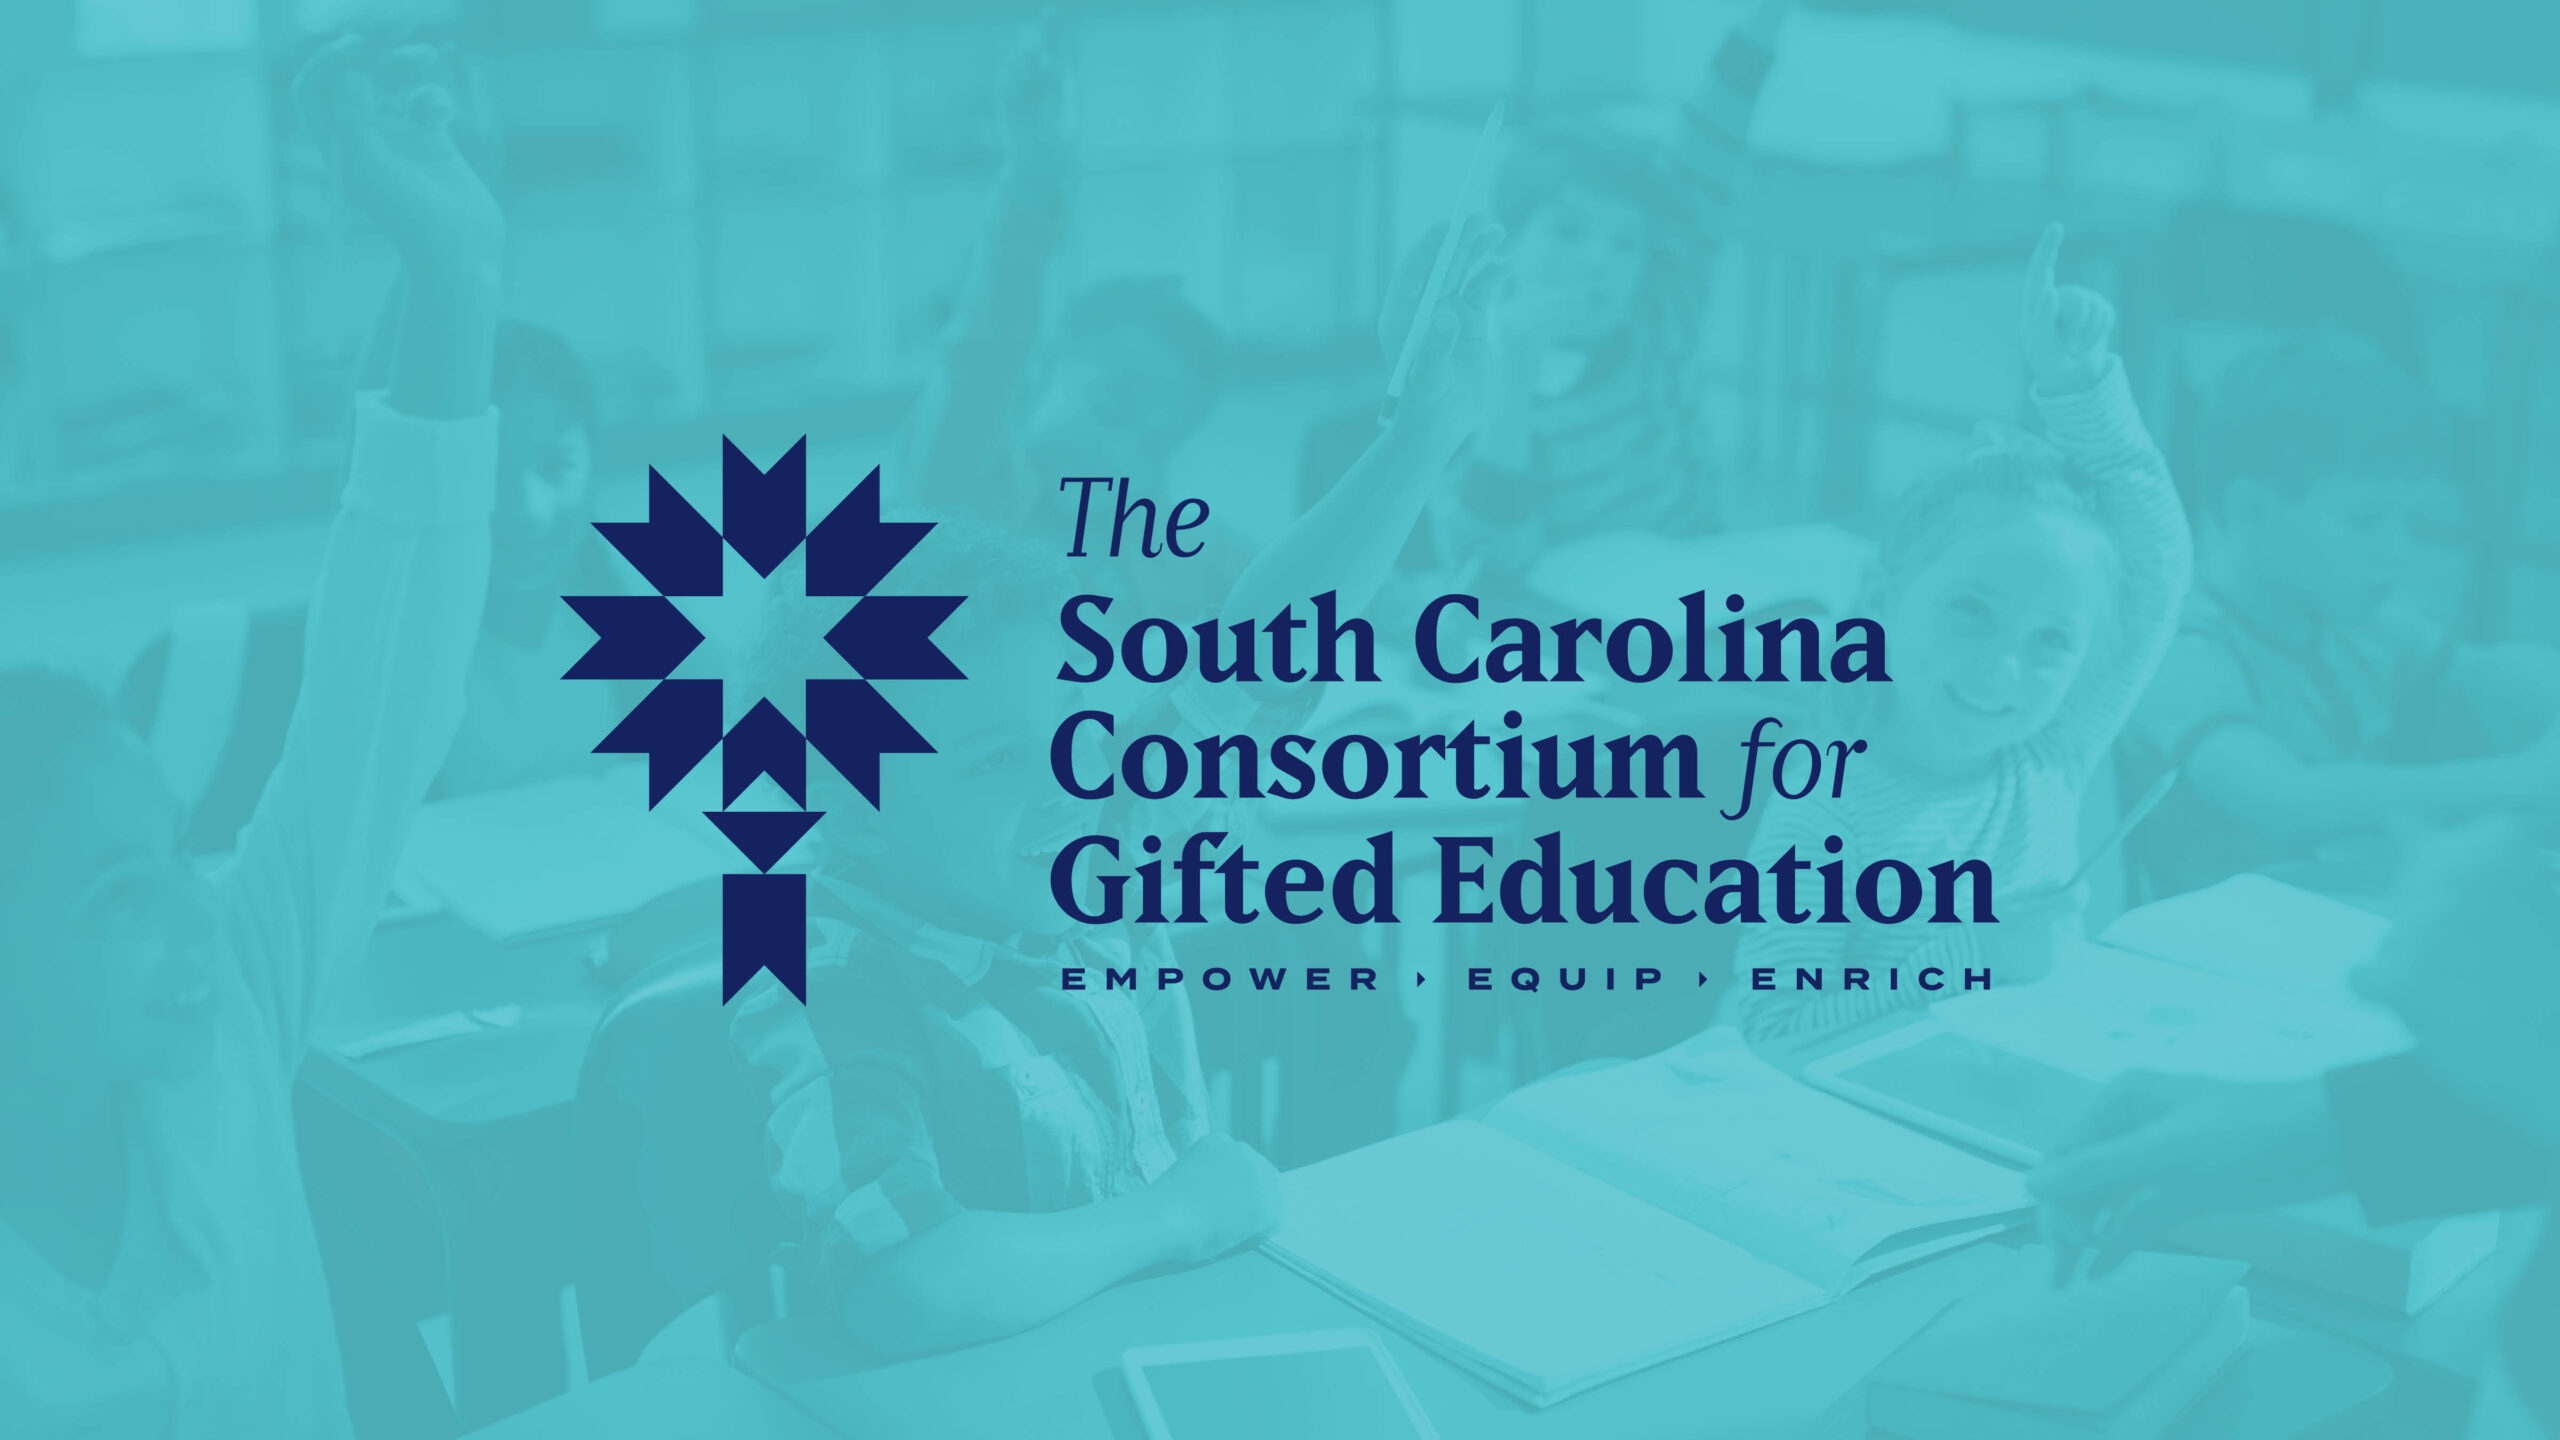 The South Carolina Consortium for Gifted Education